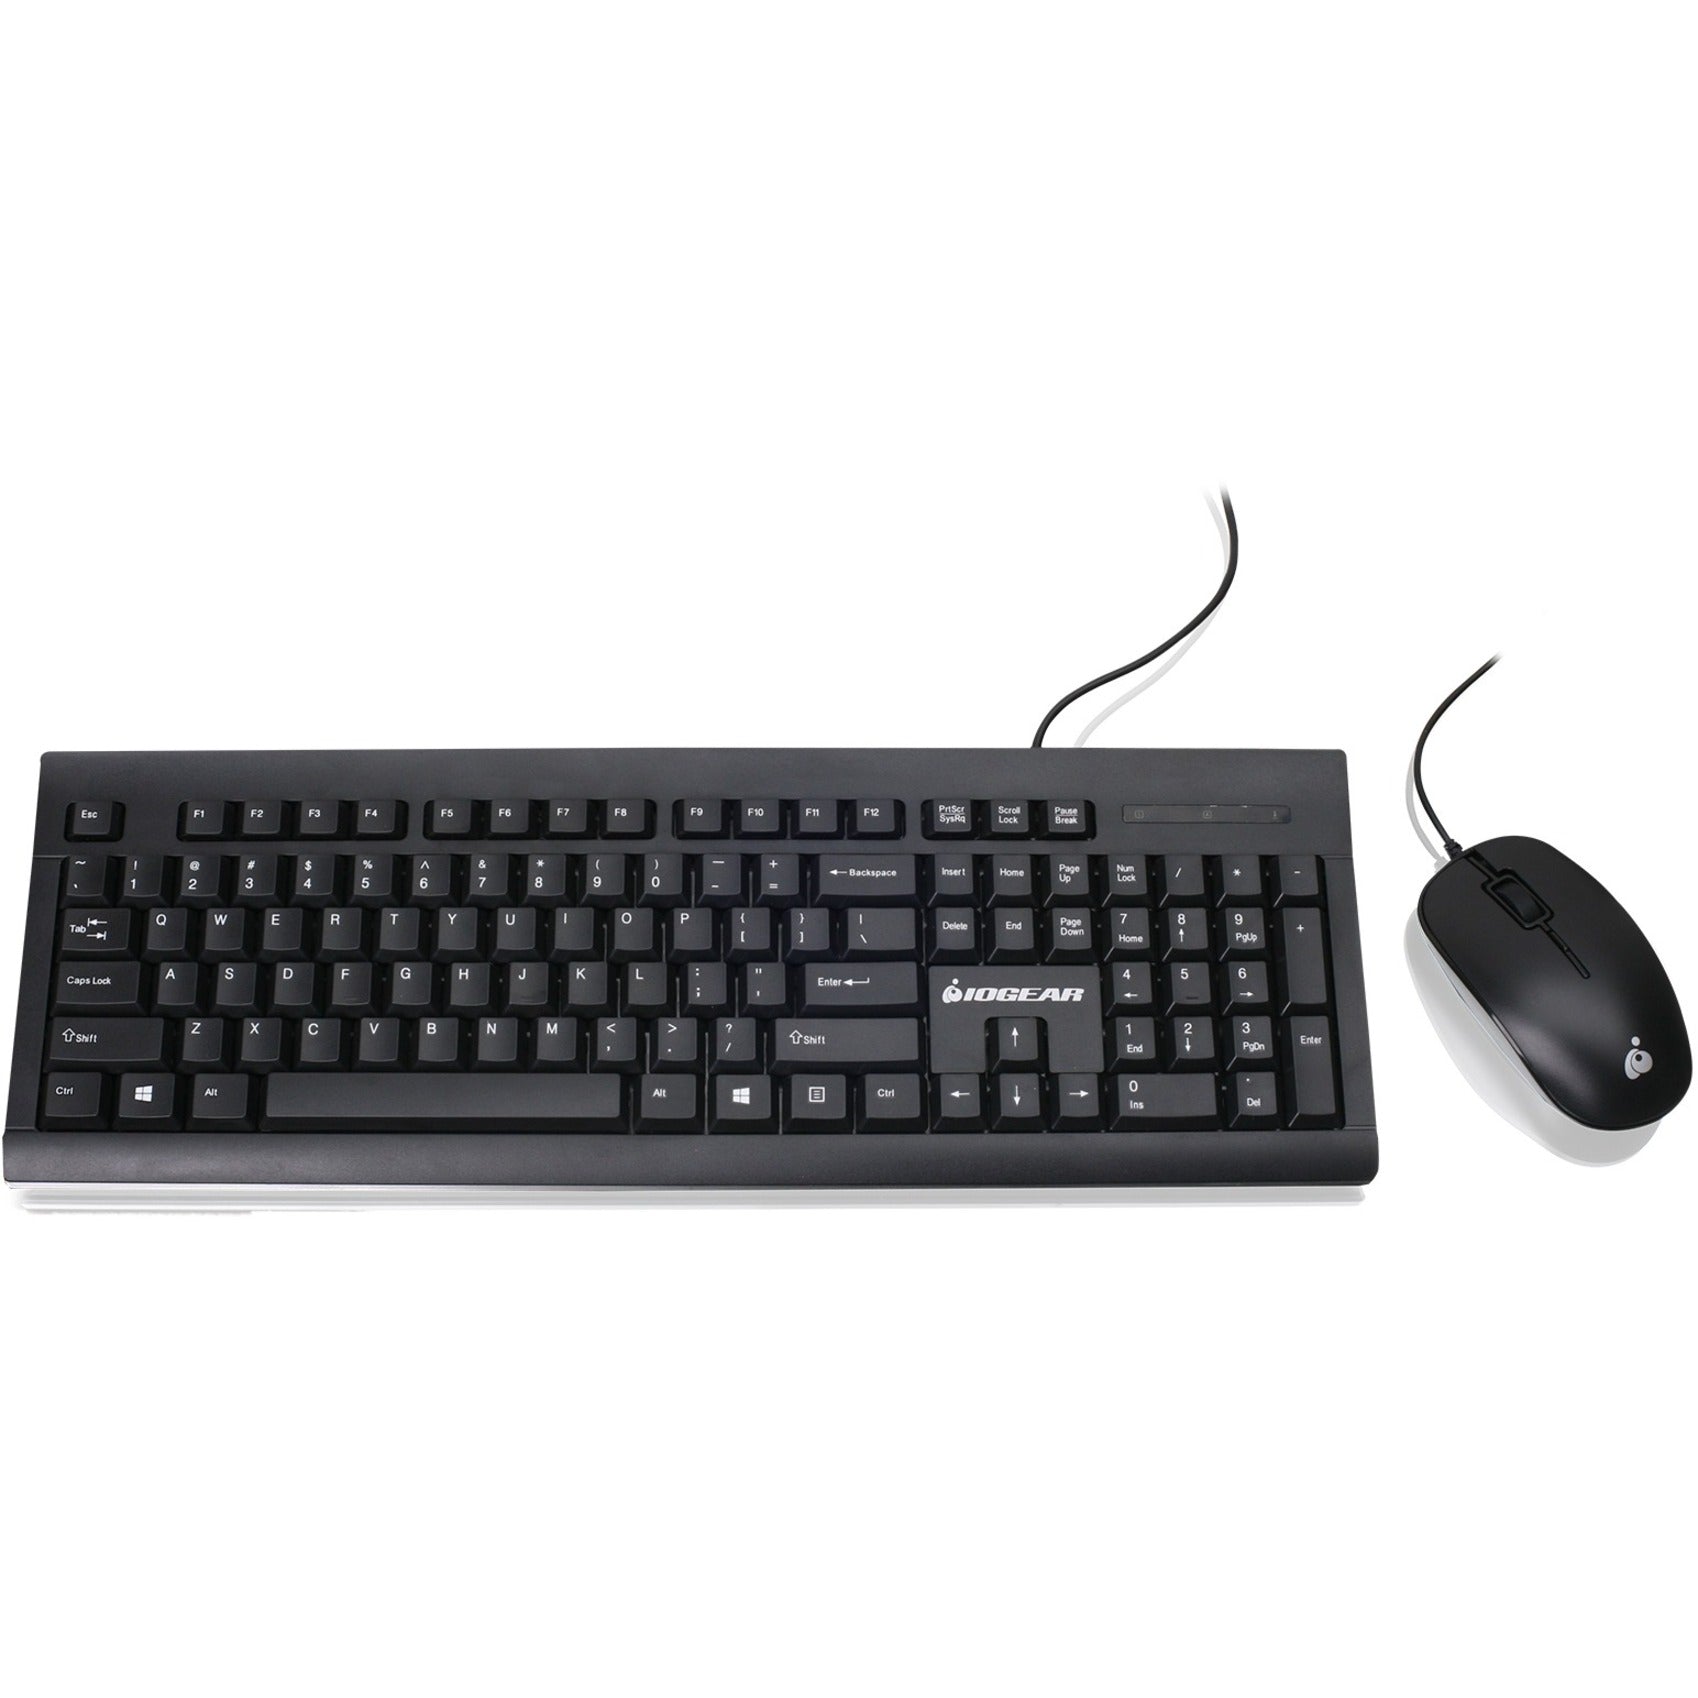 IOGEAR GKM513B Spill-Resistant Keyboard and Mouse Combo, USB Wired, Windows/Mac Compatible